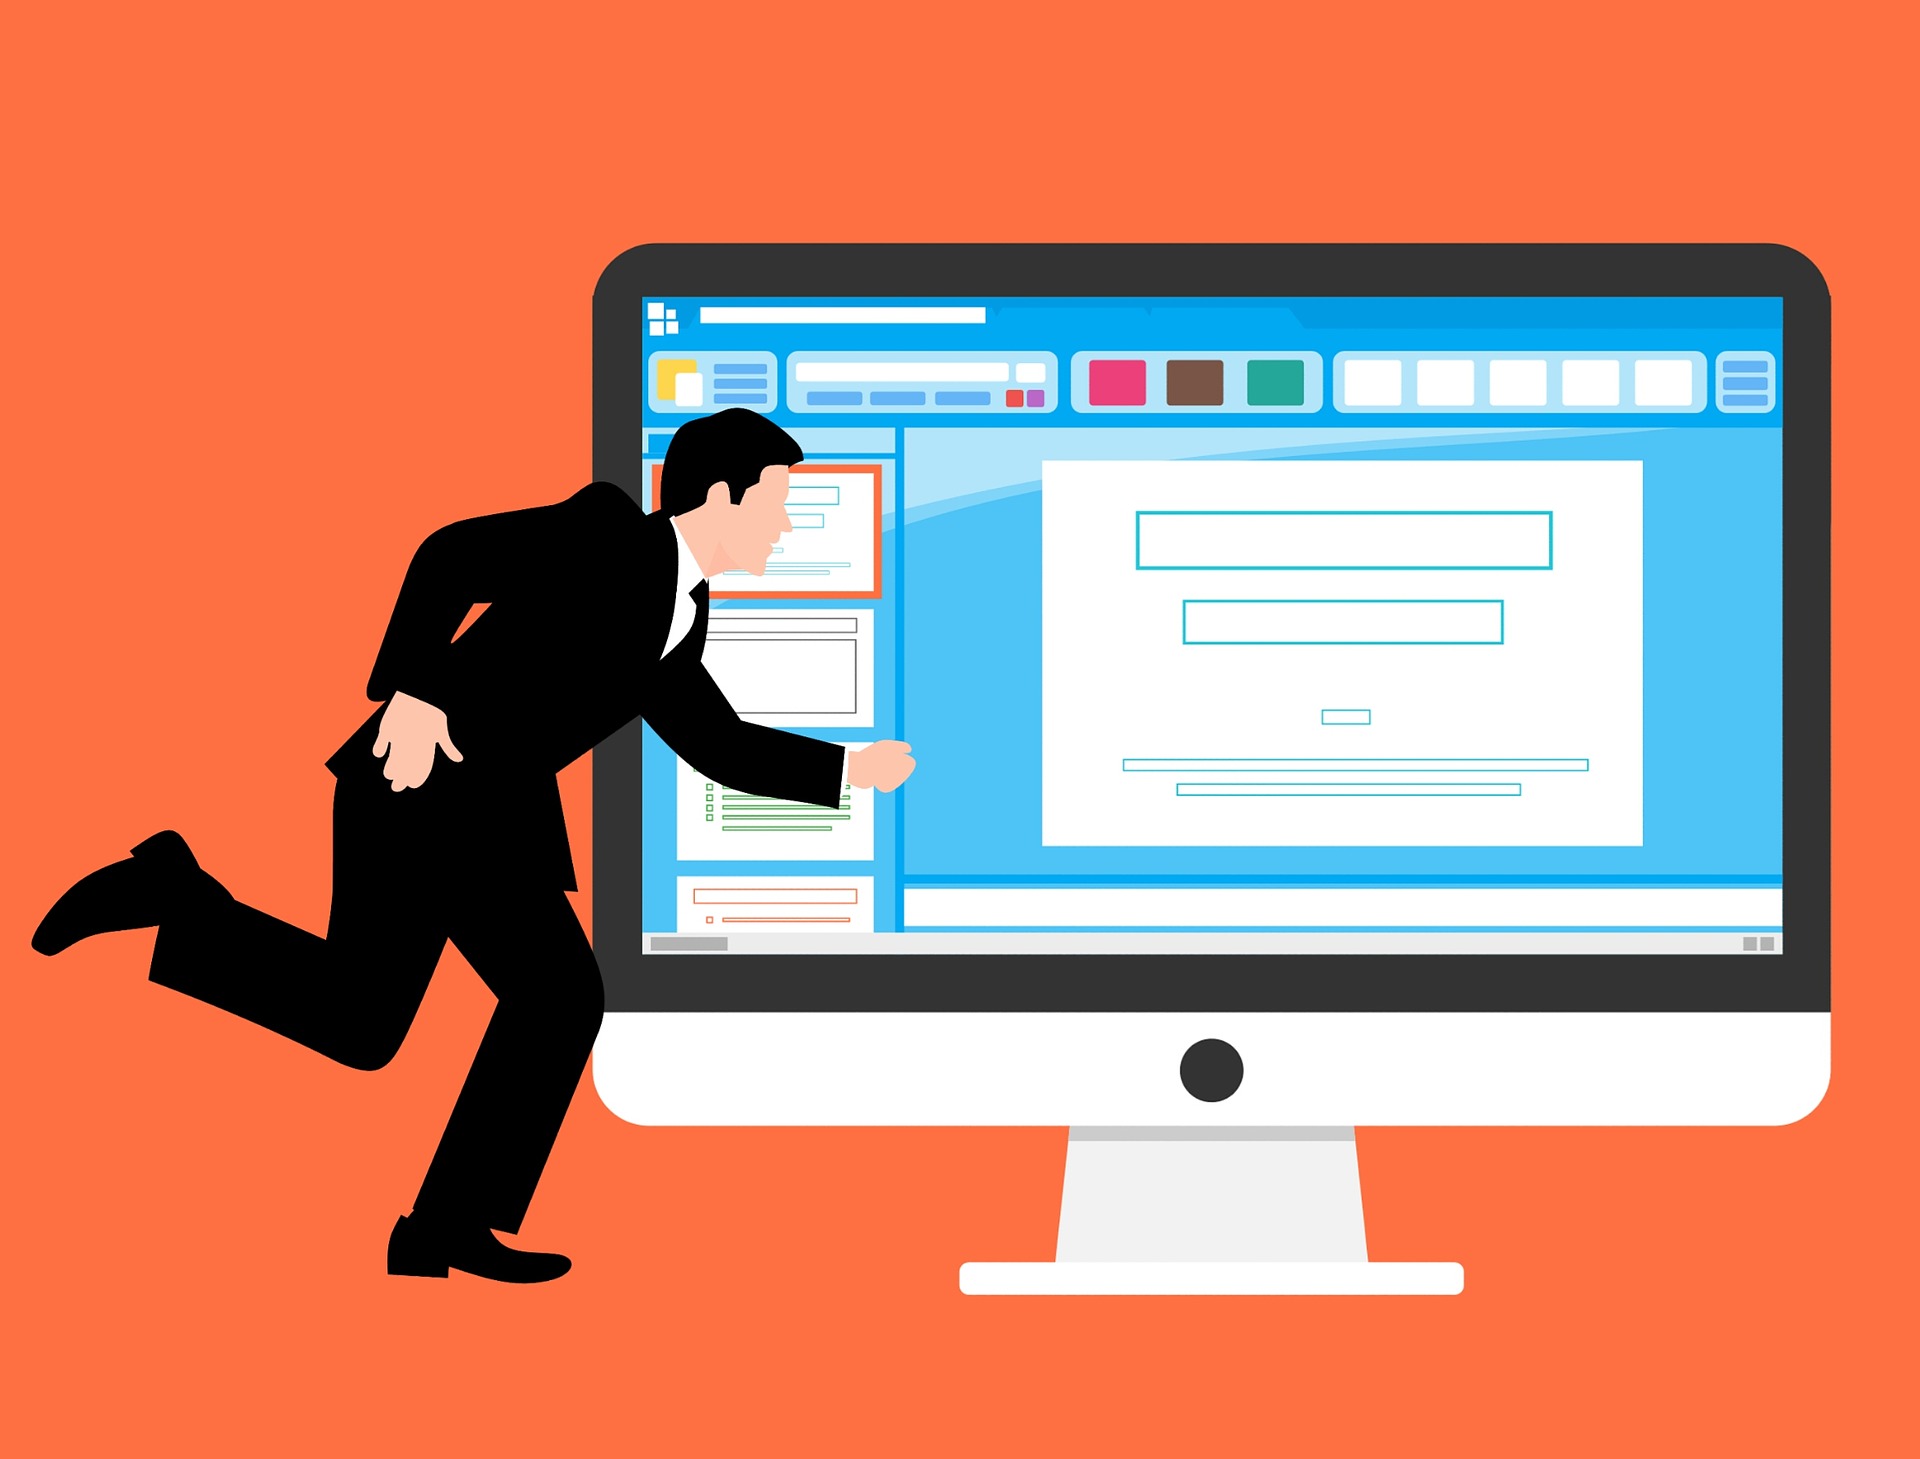 A vector graphic of a man in a suit running toward a website on a computer monitor, published to: "3 Ways to Increase Website Traffic Fast"